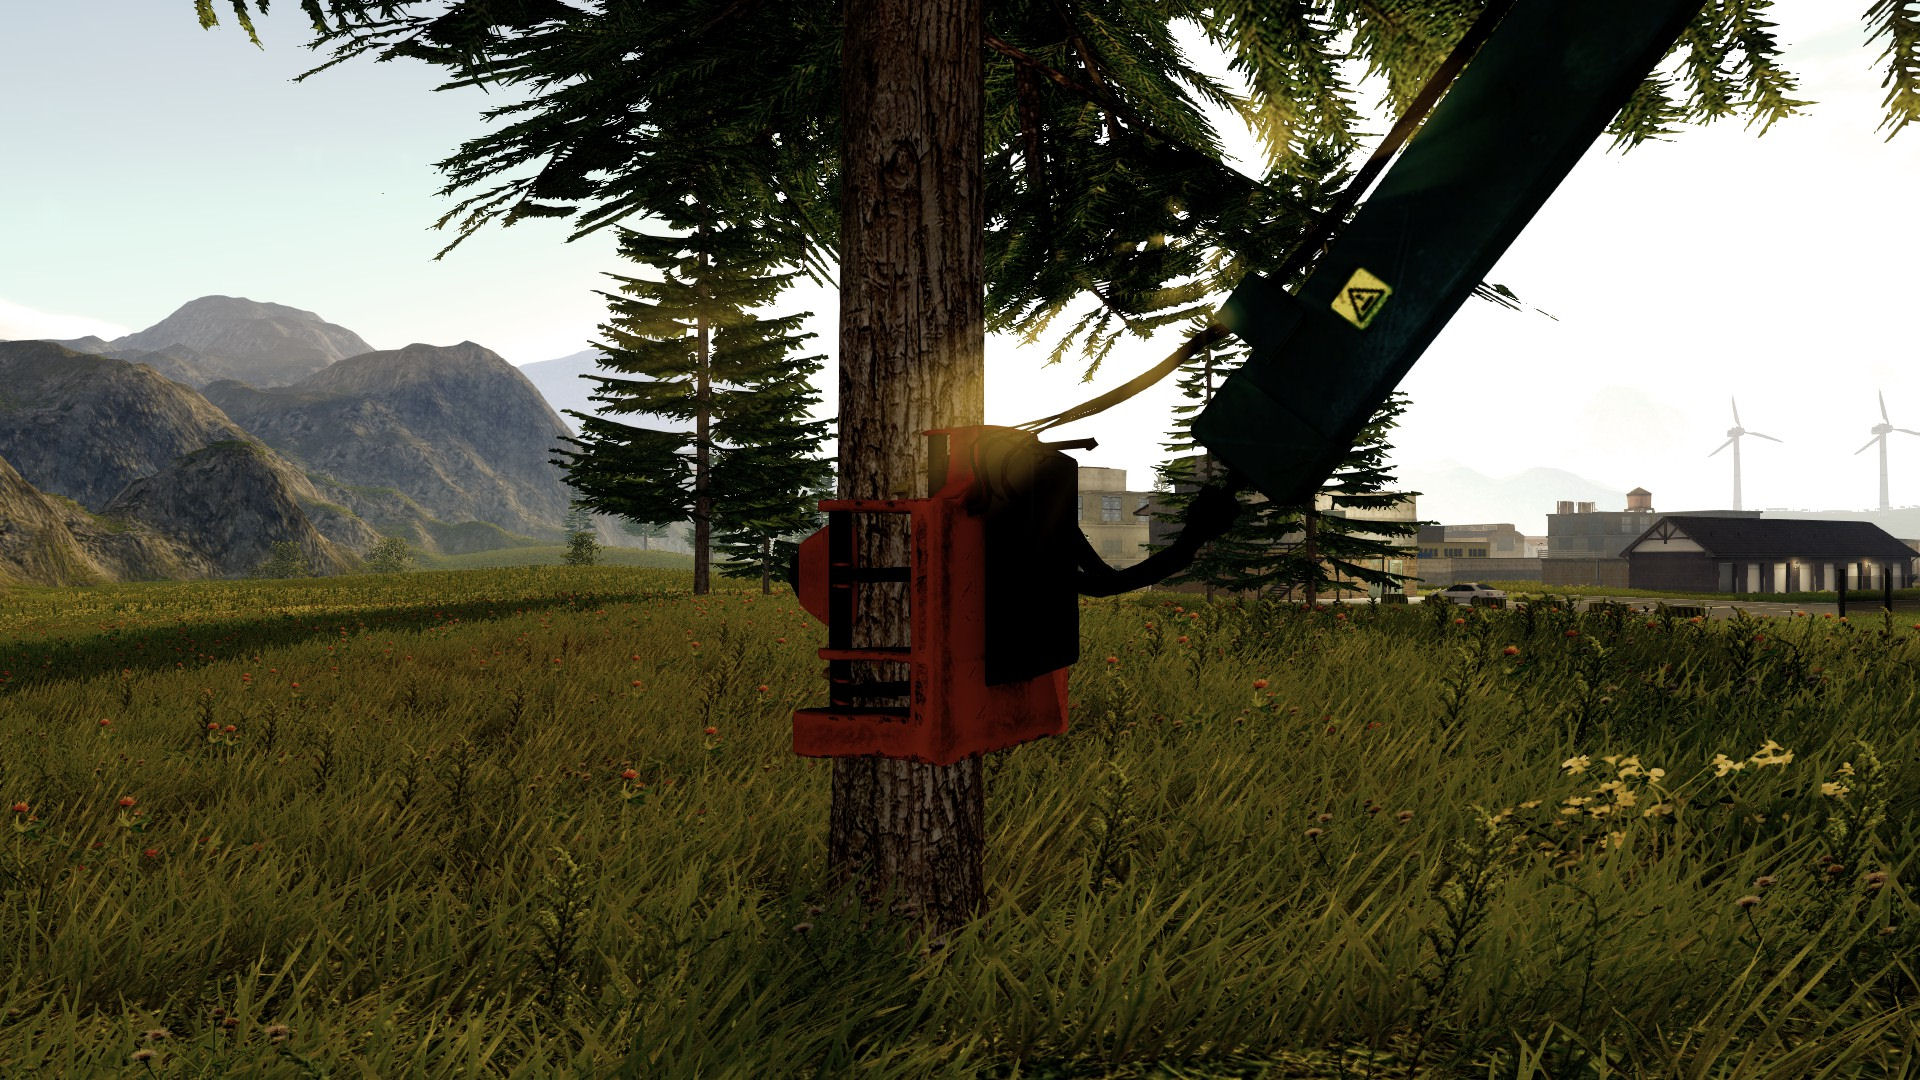 Forestry 2017: The Simulation - screenshot 9